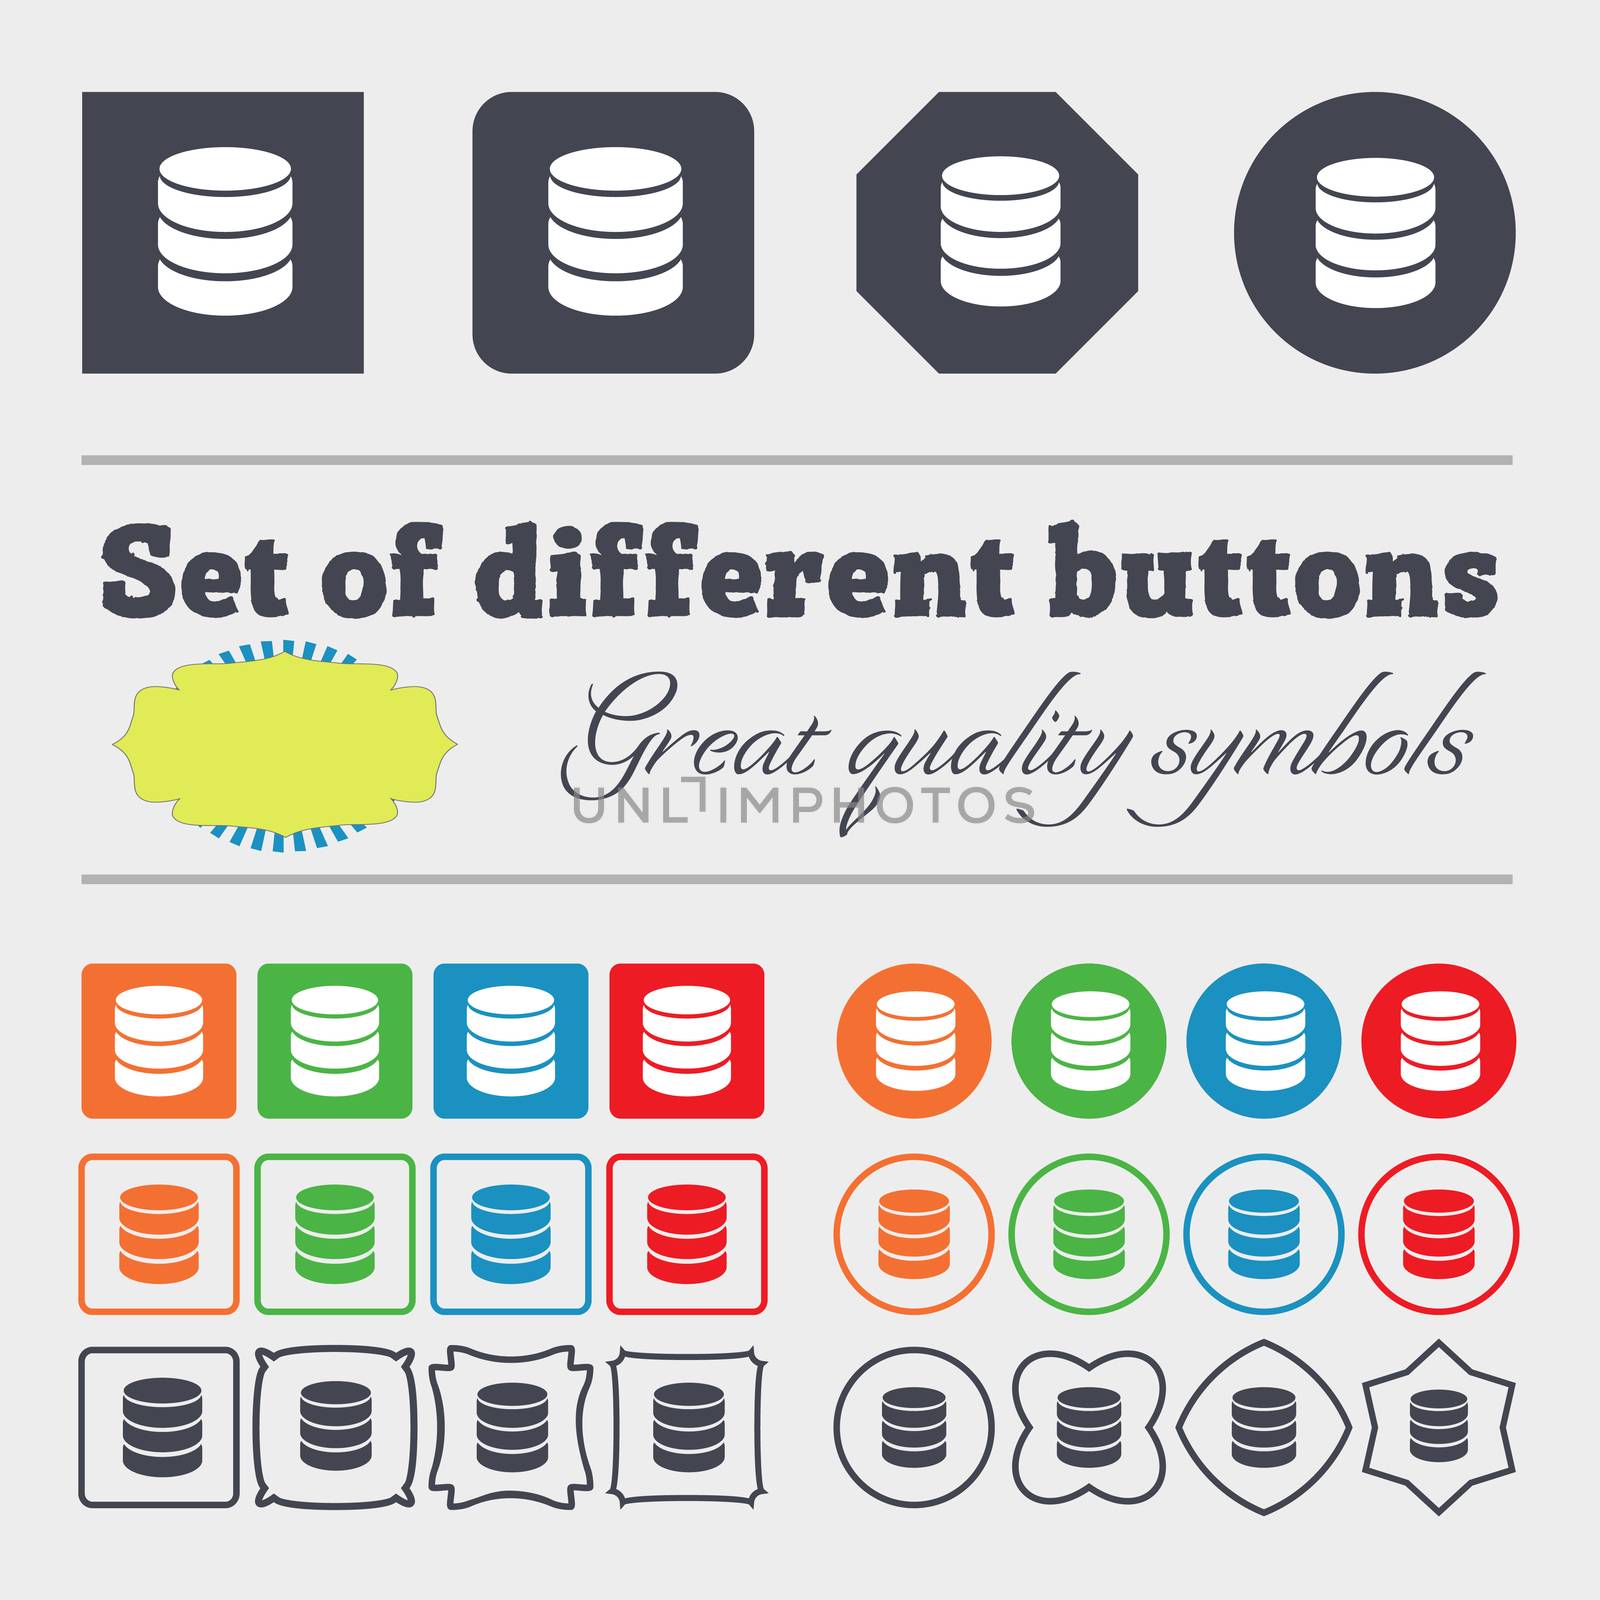 Hard disk and database sign icon. flash drive stick symbol. Big set of colorful, diverse, high-quality buttons. illustration